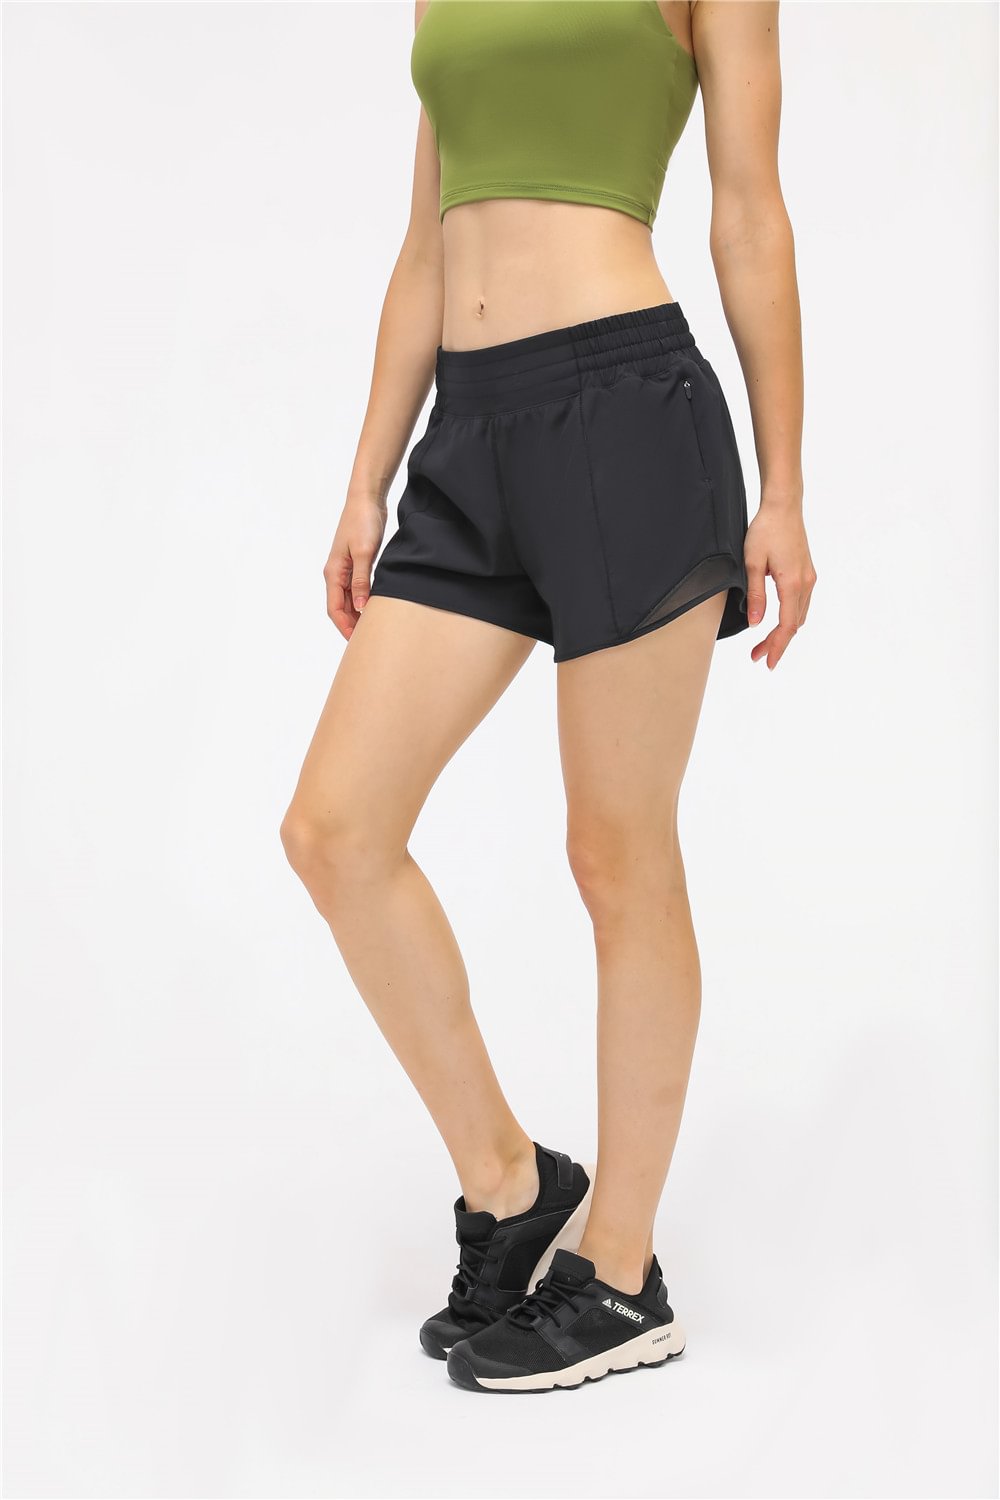 Ladies running shorts with pockets at Hergymclothing sportswear online shop